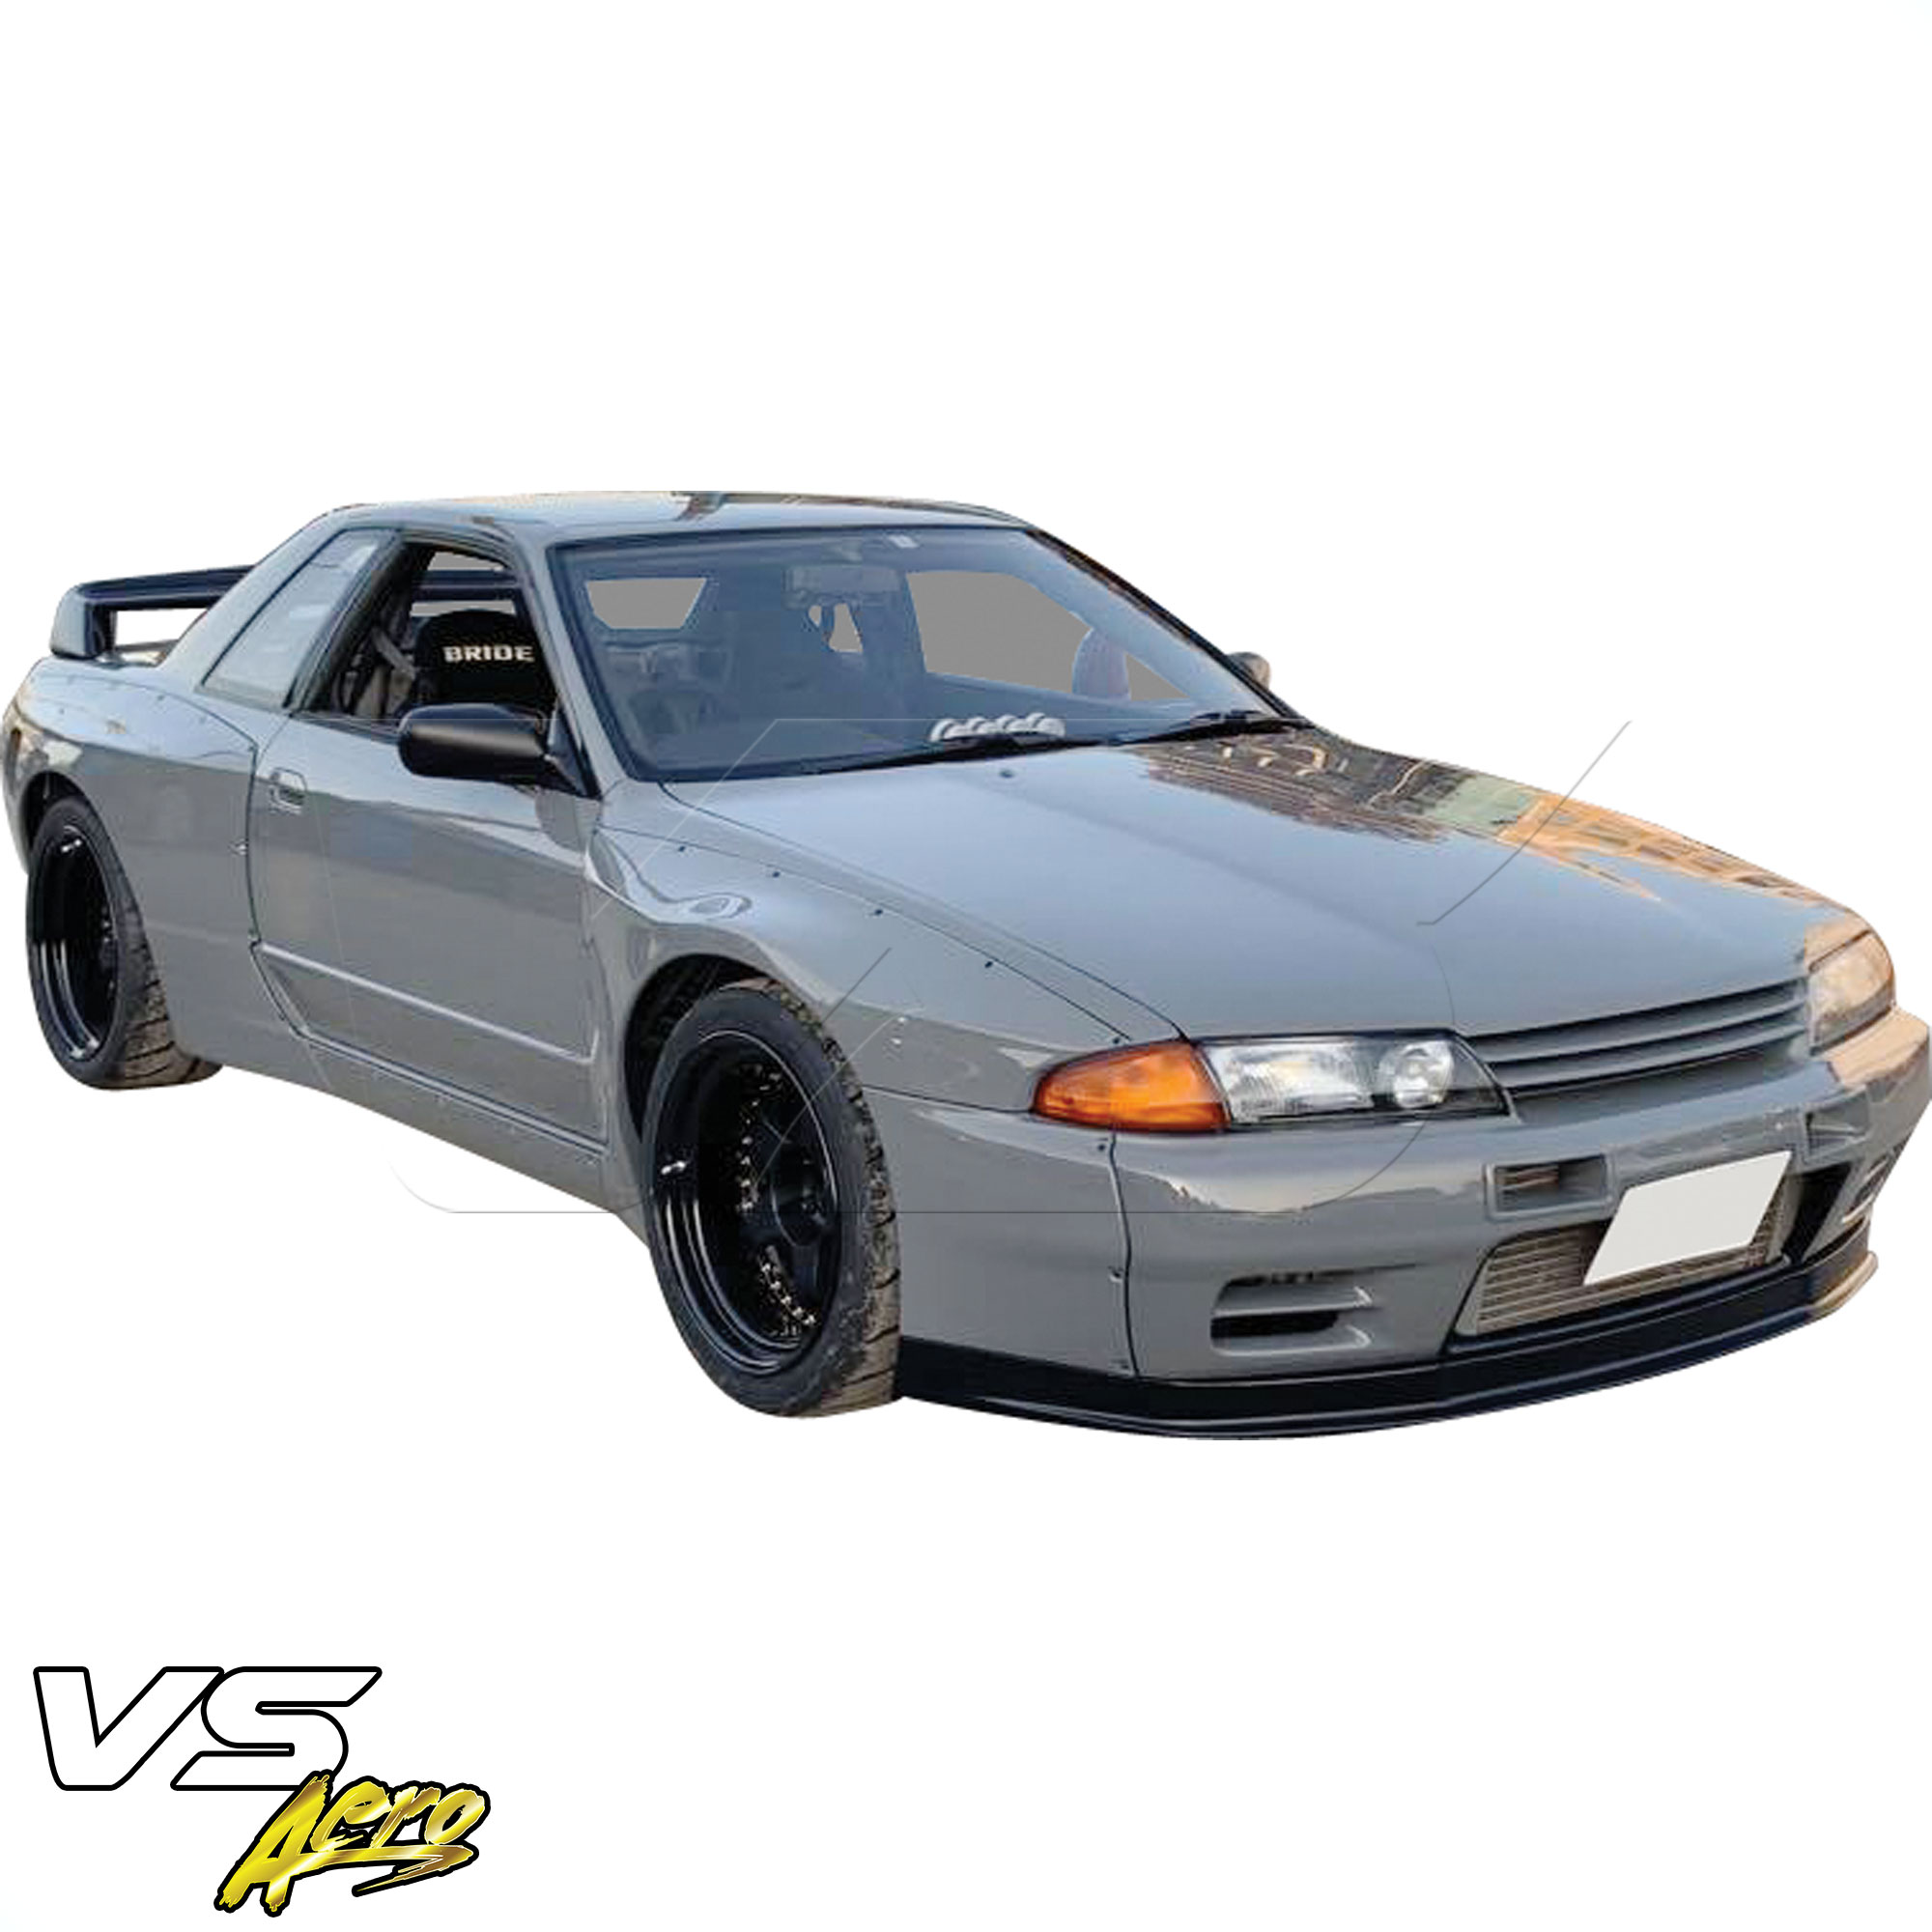 VSaero FRP TKYO Wide Body 40mm Fender Flares (front) 4pc > Nissan Skyline R32 1990-1994 > 2dr Coupe - Image 17